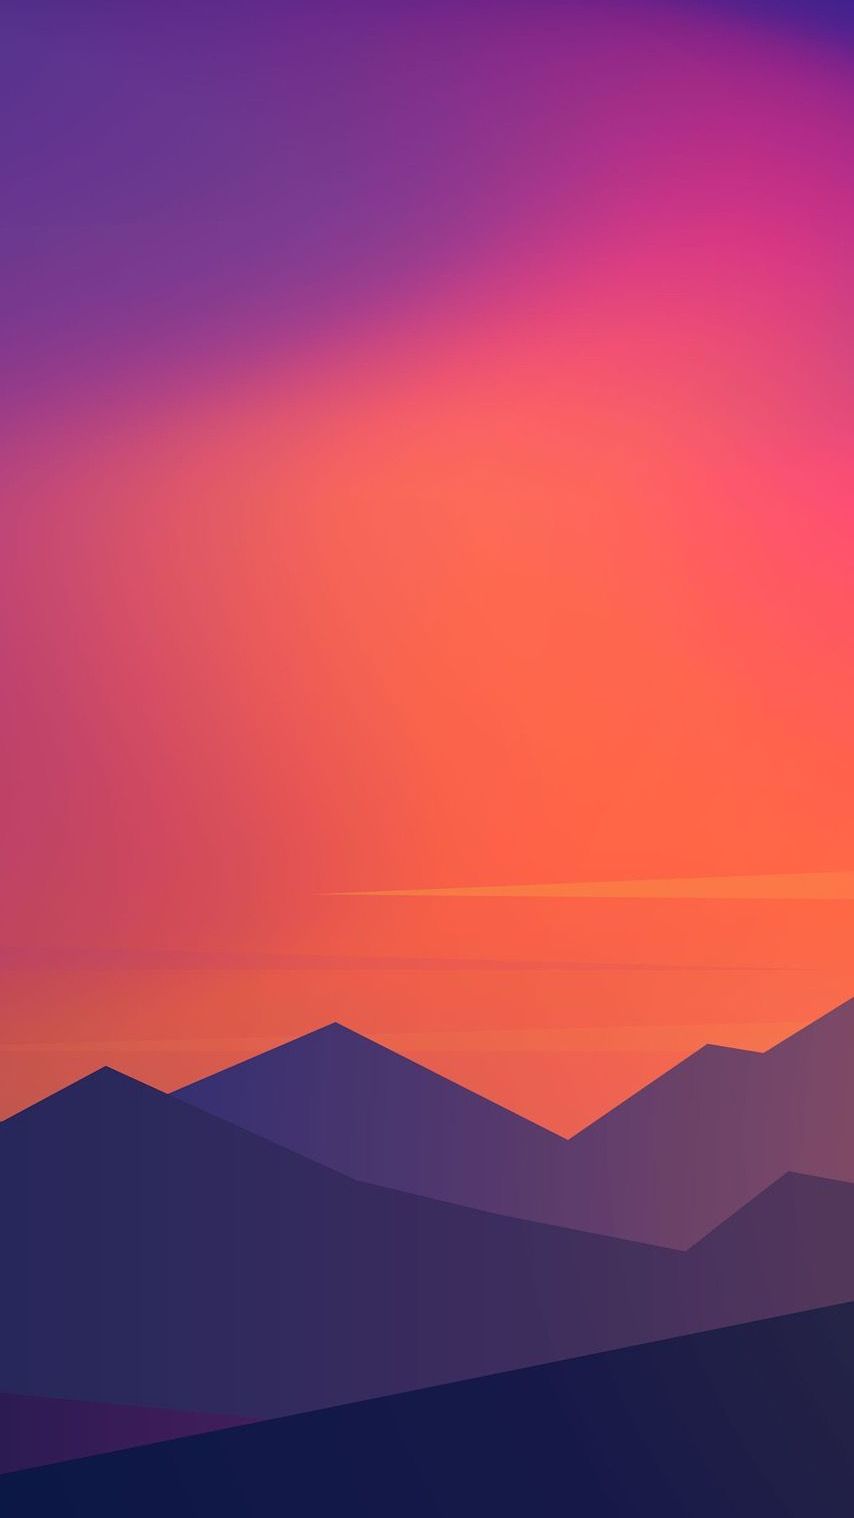 A sunset scene with mountains in the background - Mountain